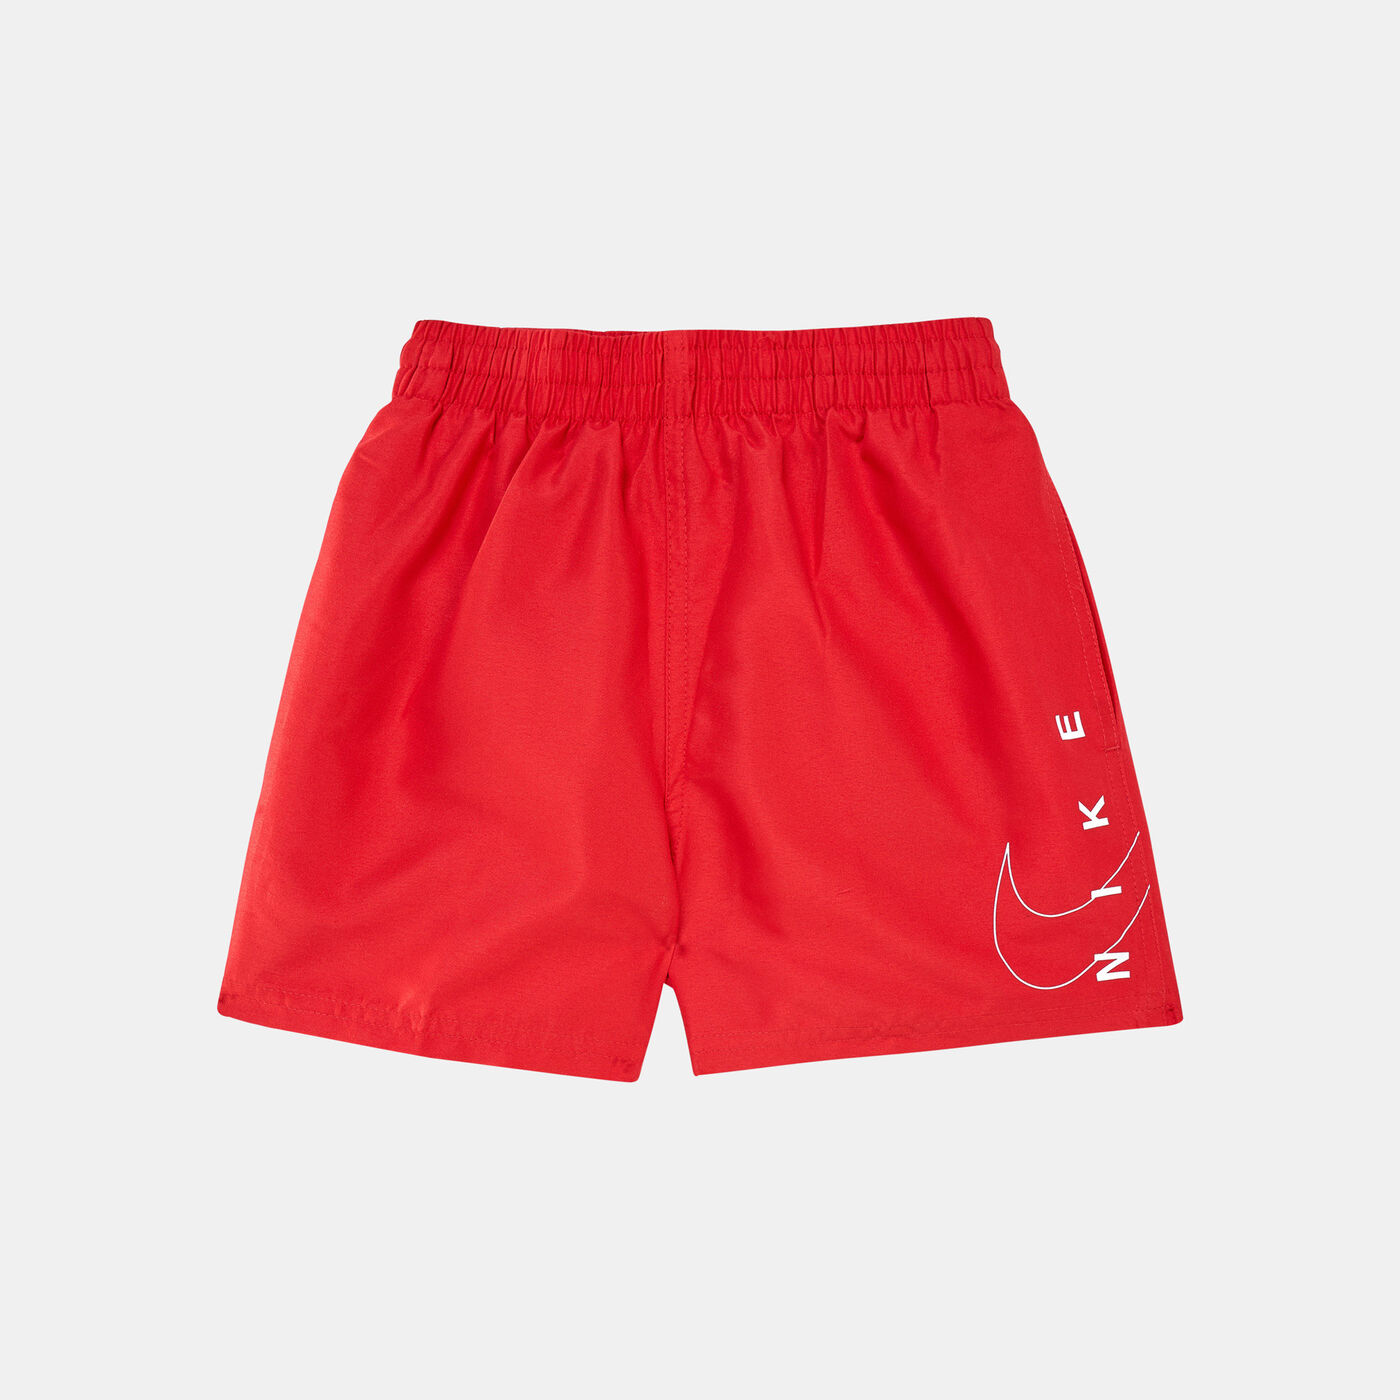 Kids' 4-inch Volley Shorts